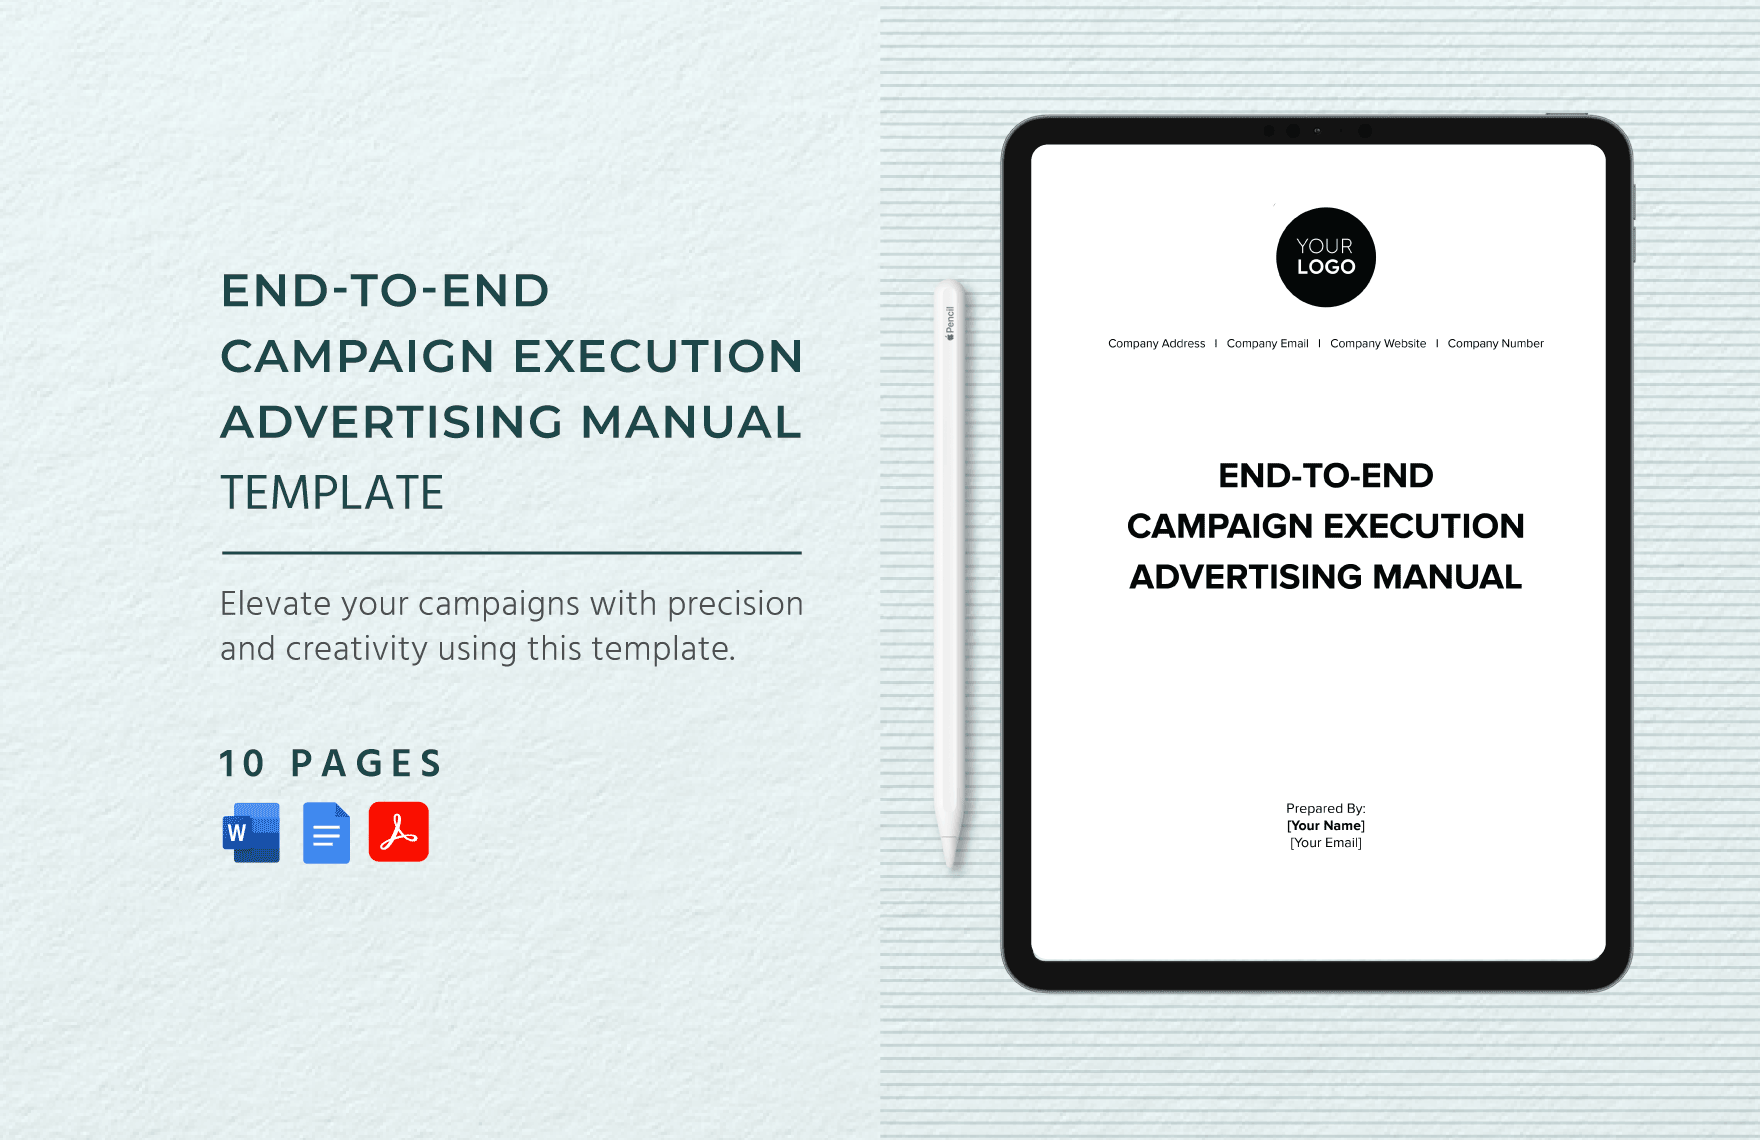 End-to-End Campaign Execution Advertising Manual Template